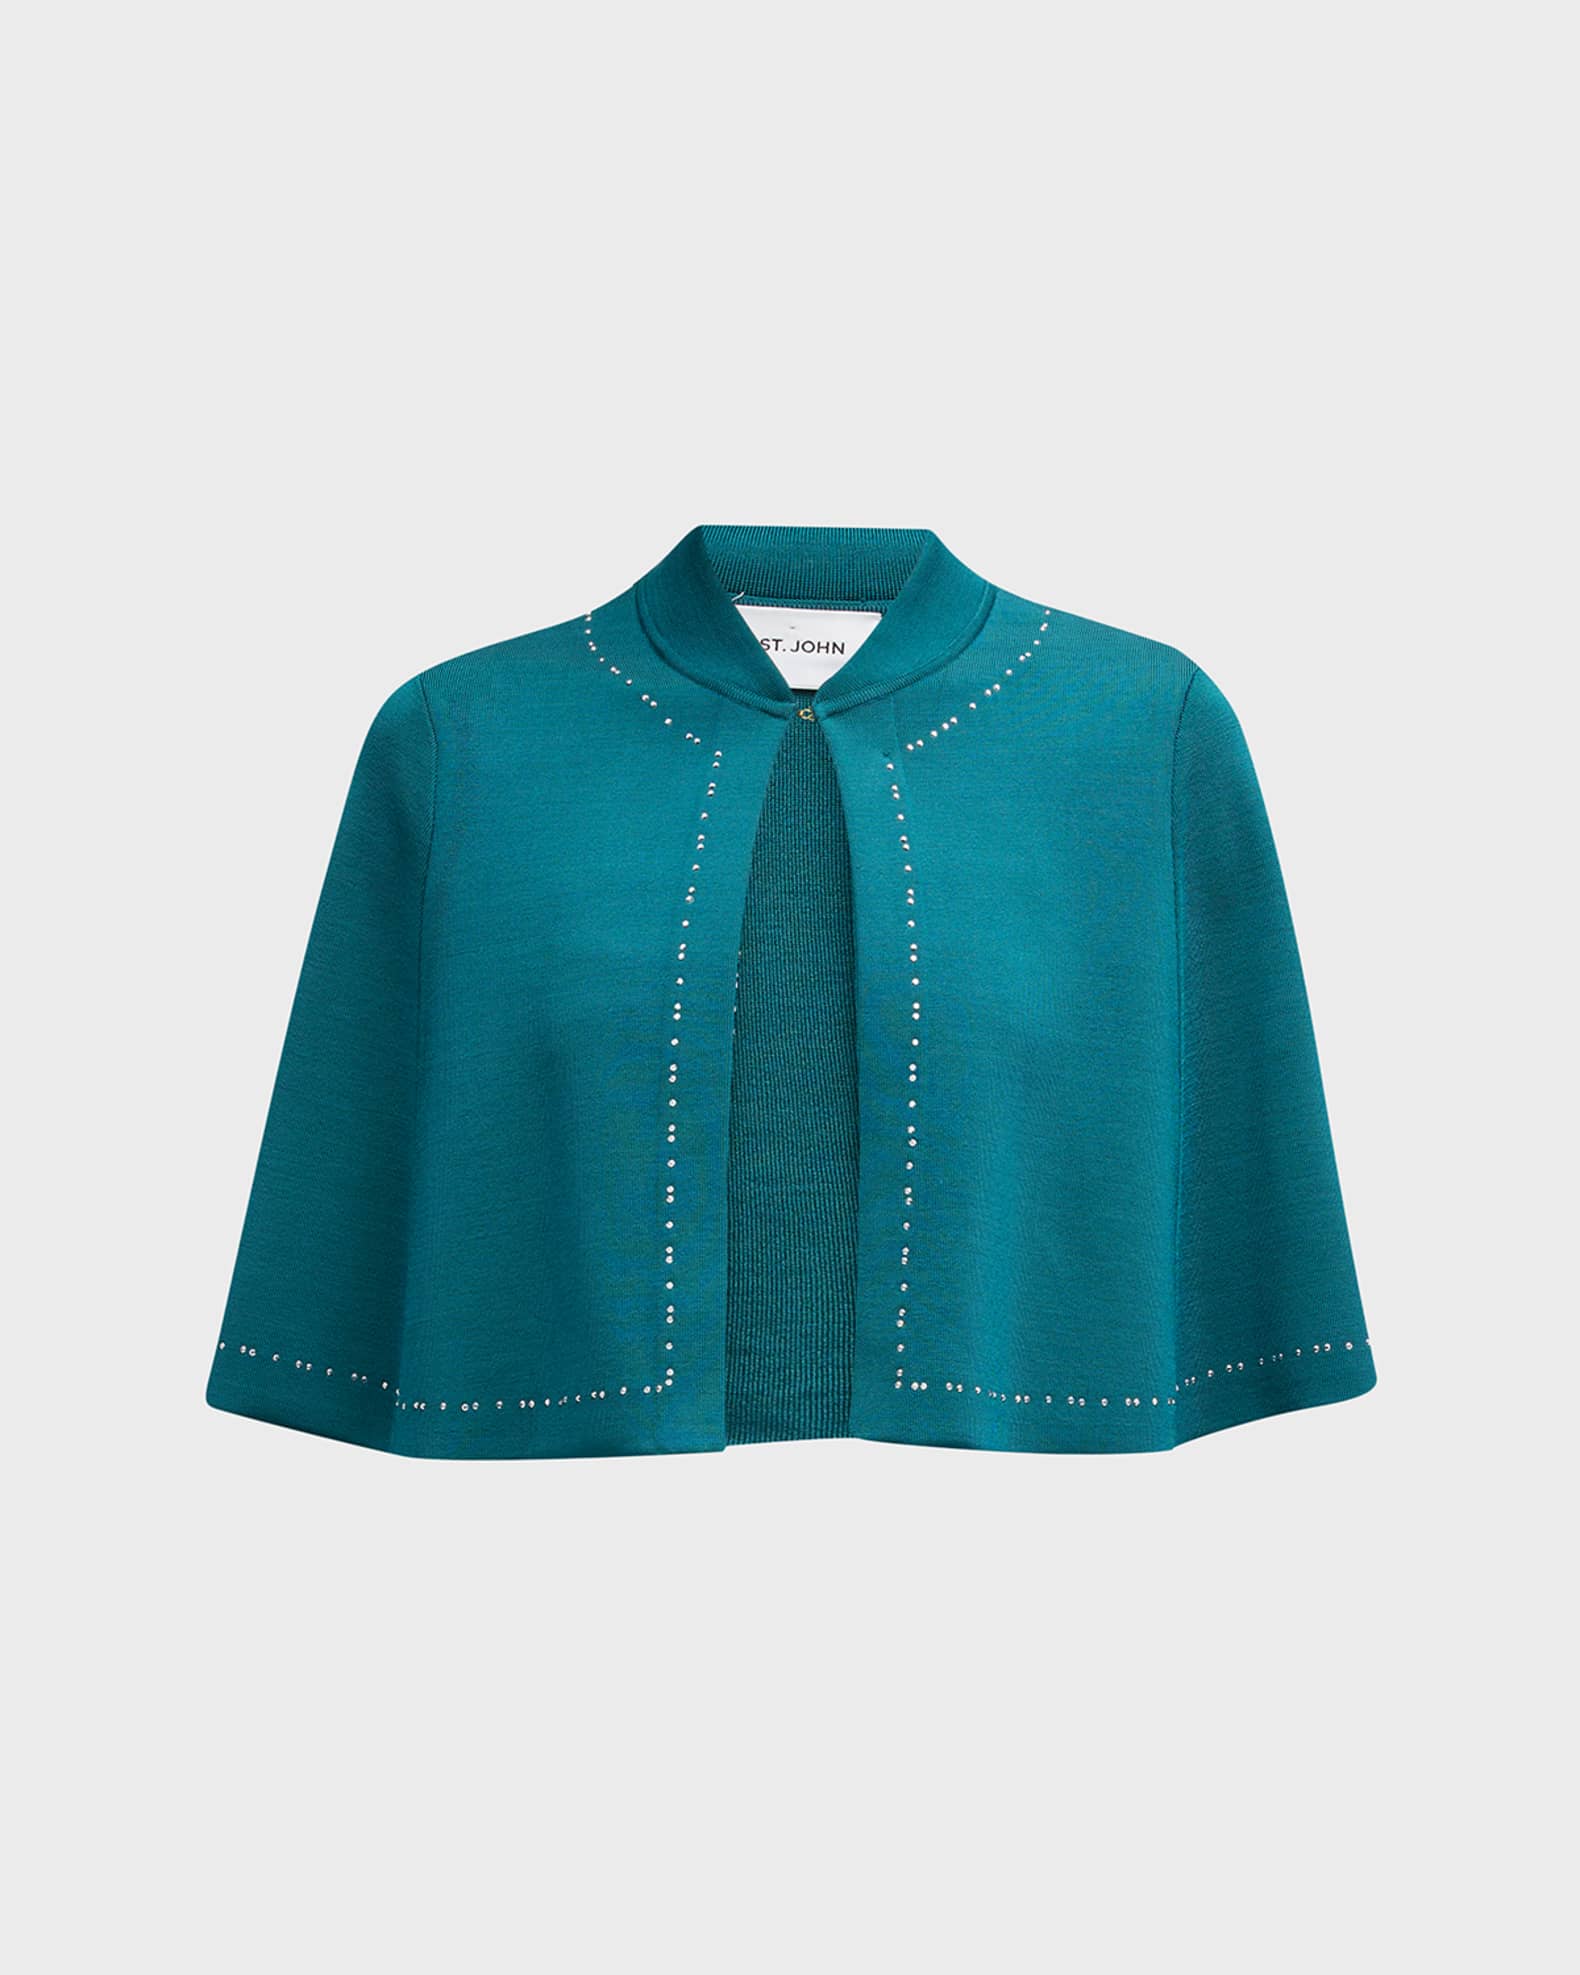 St. John Strass Embellished Stretch Pique Knit Cape | Neiman Marcus